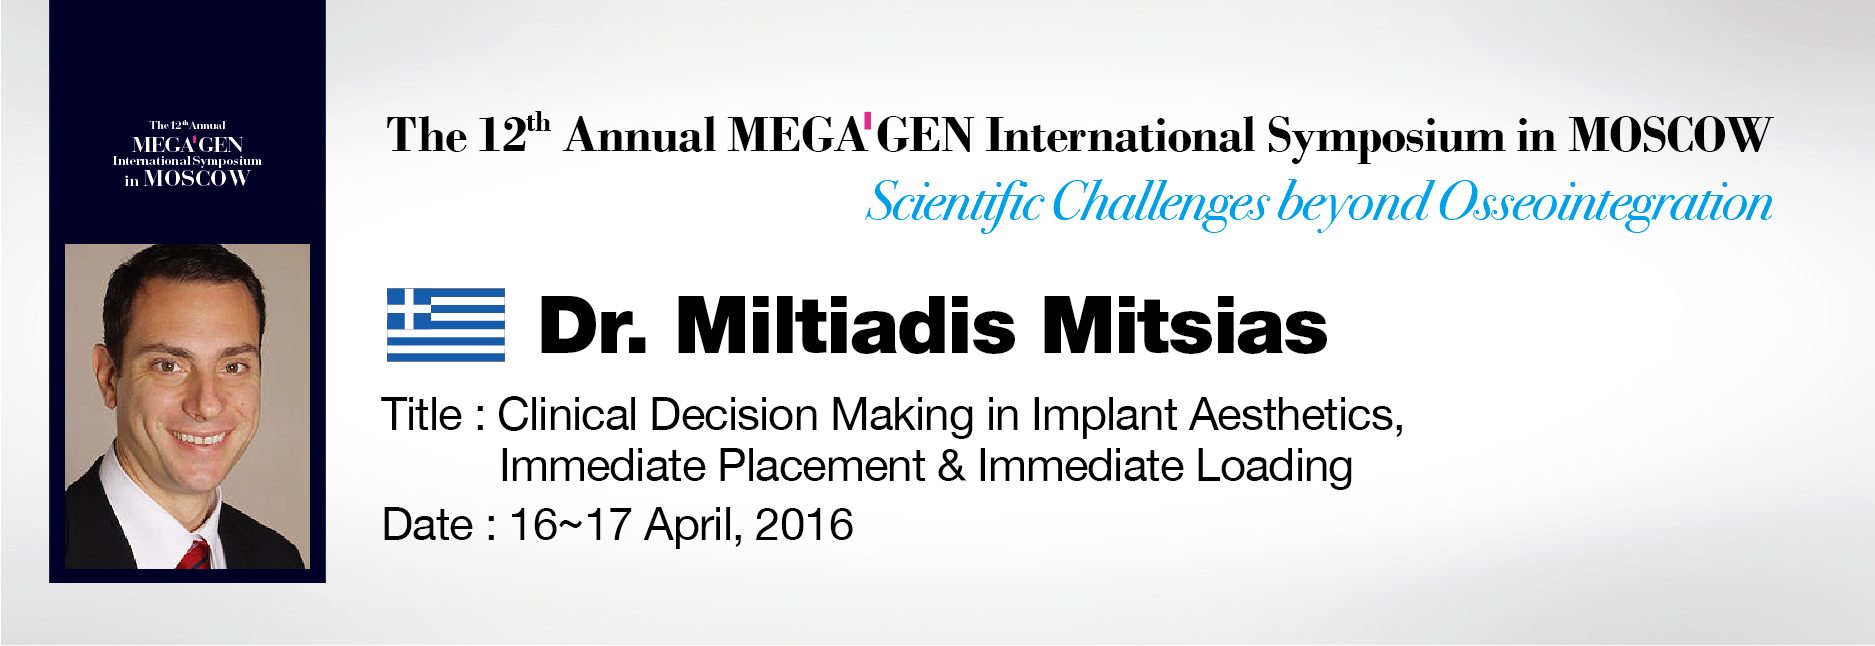 Clinical Decision Making in Implant Aesthetics, Immediate Placement & Immediate Loading